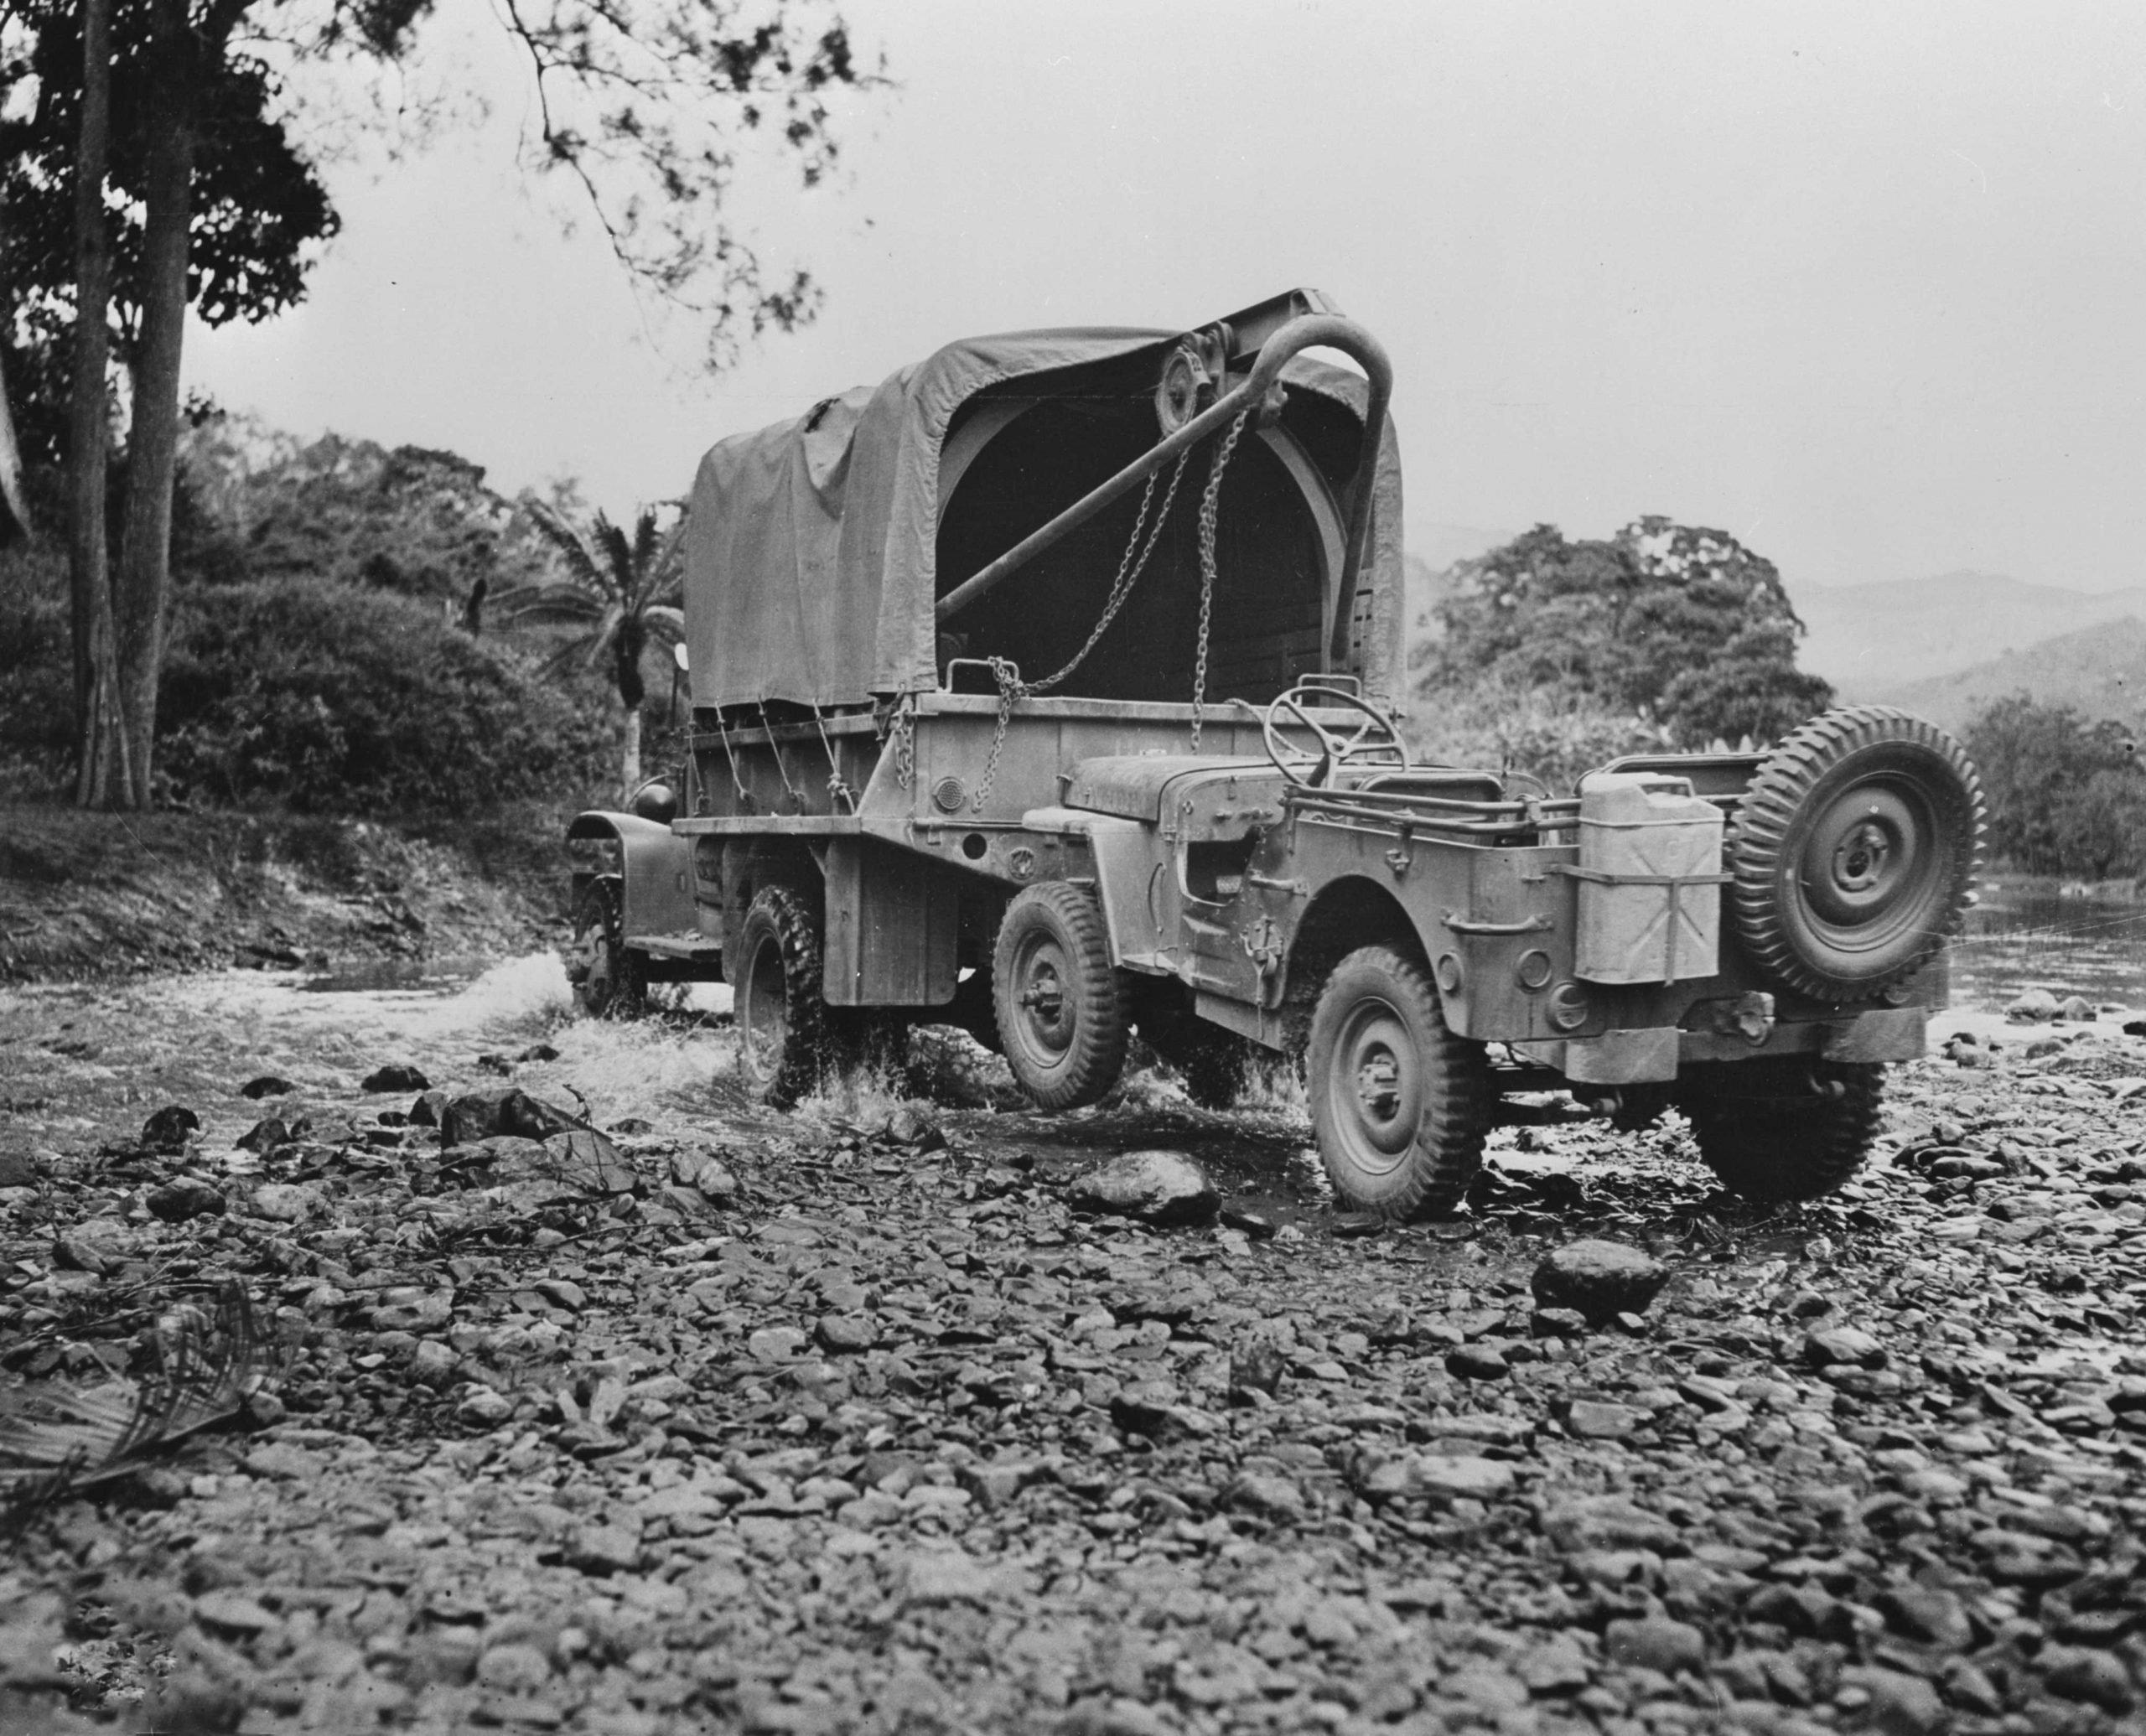 An American truck tows a Willis jeep